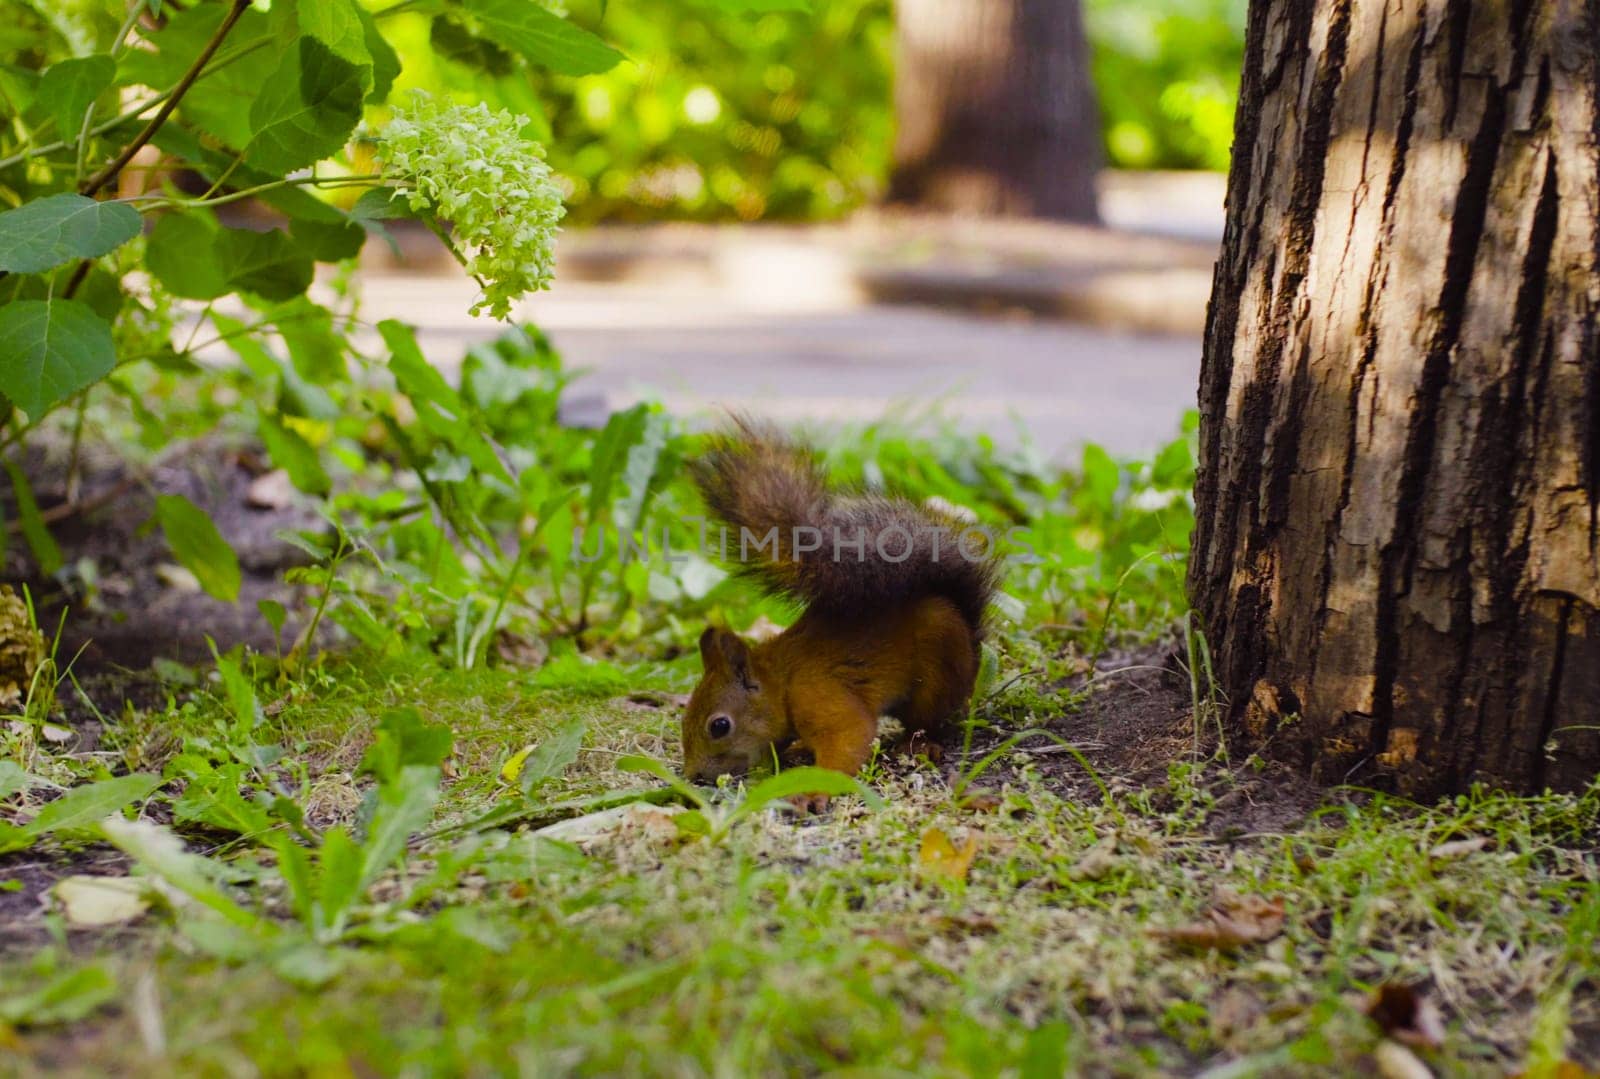 Cute Red Squirrel eating something in a park by Chudakov